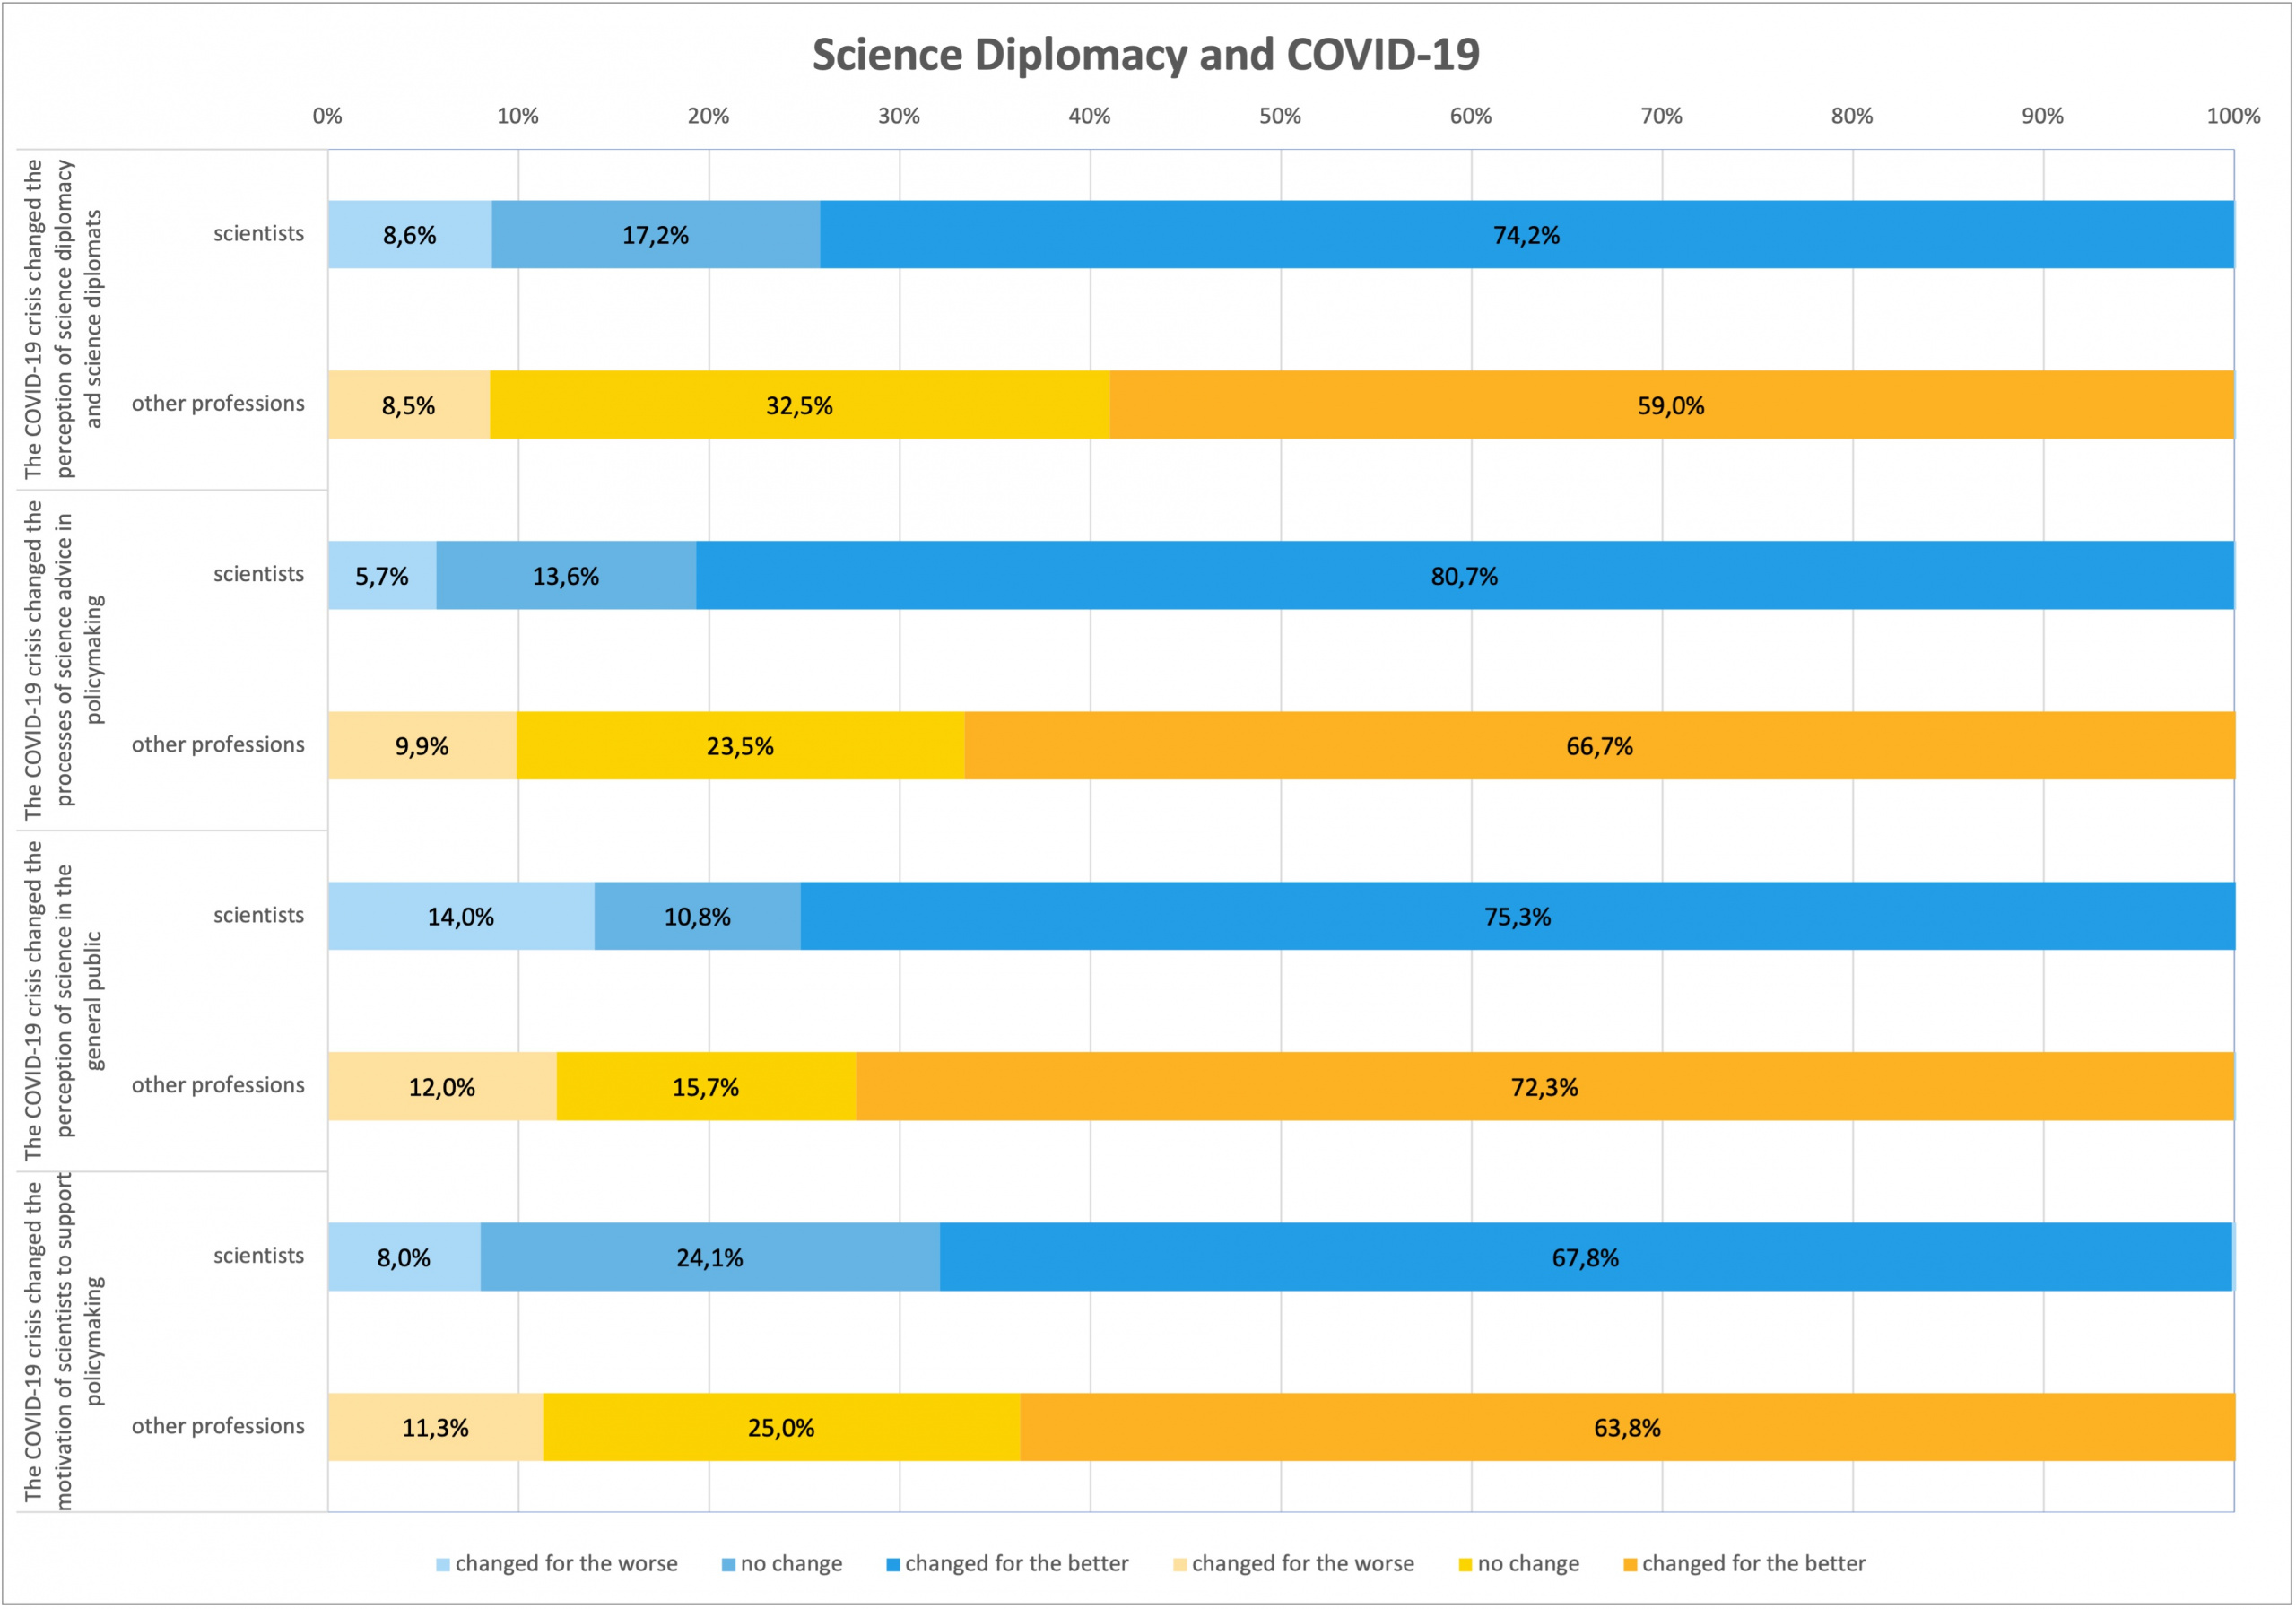 What changed due to COVID-19